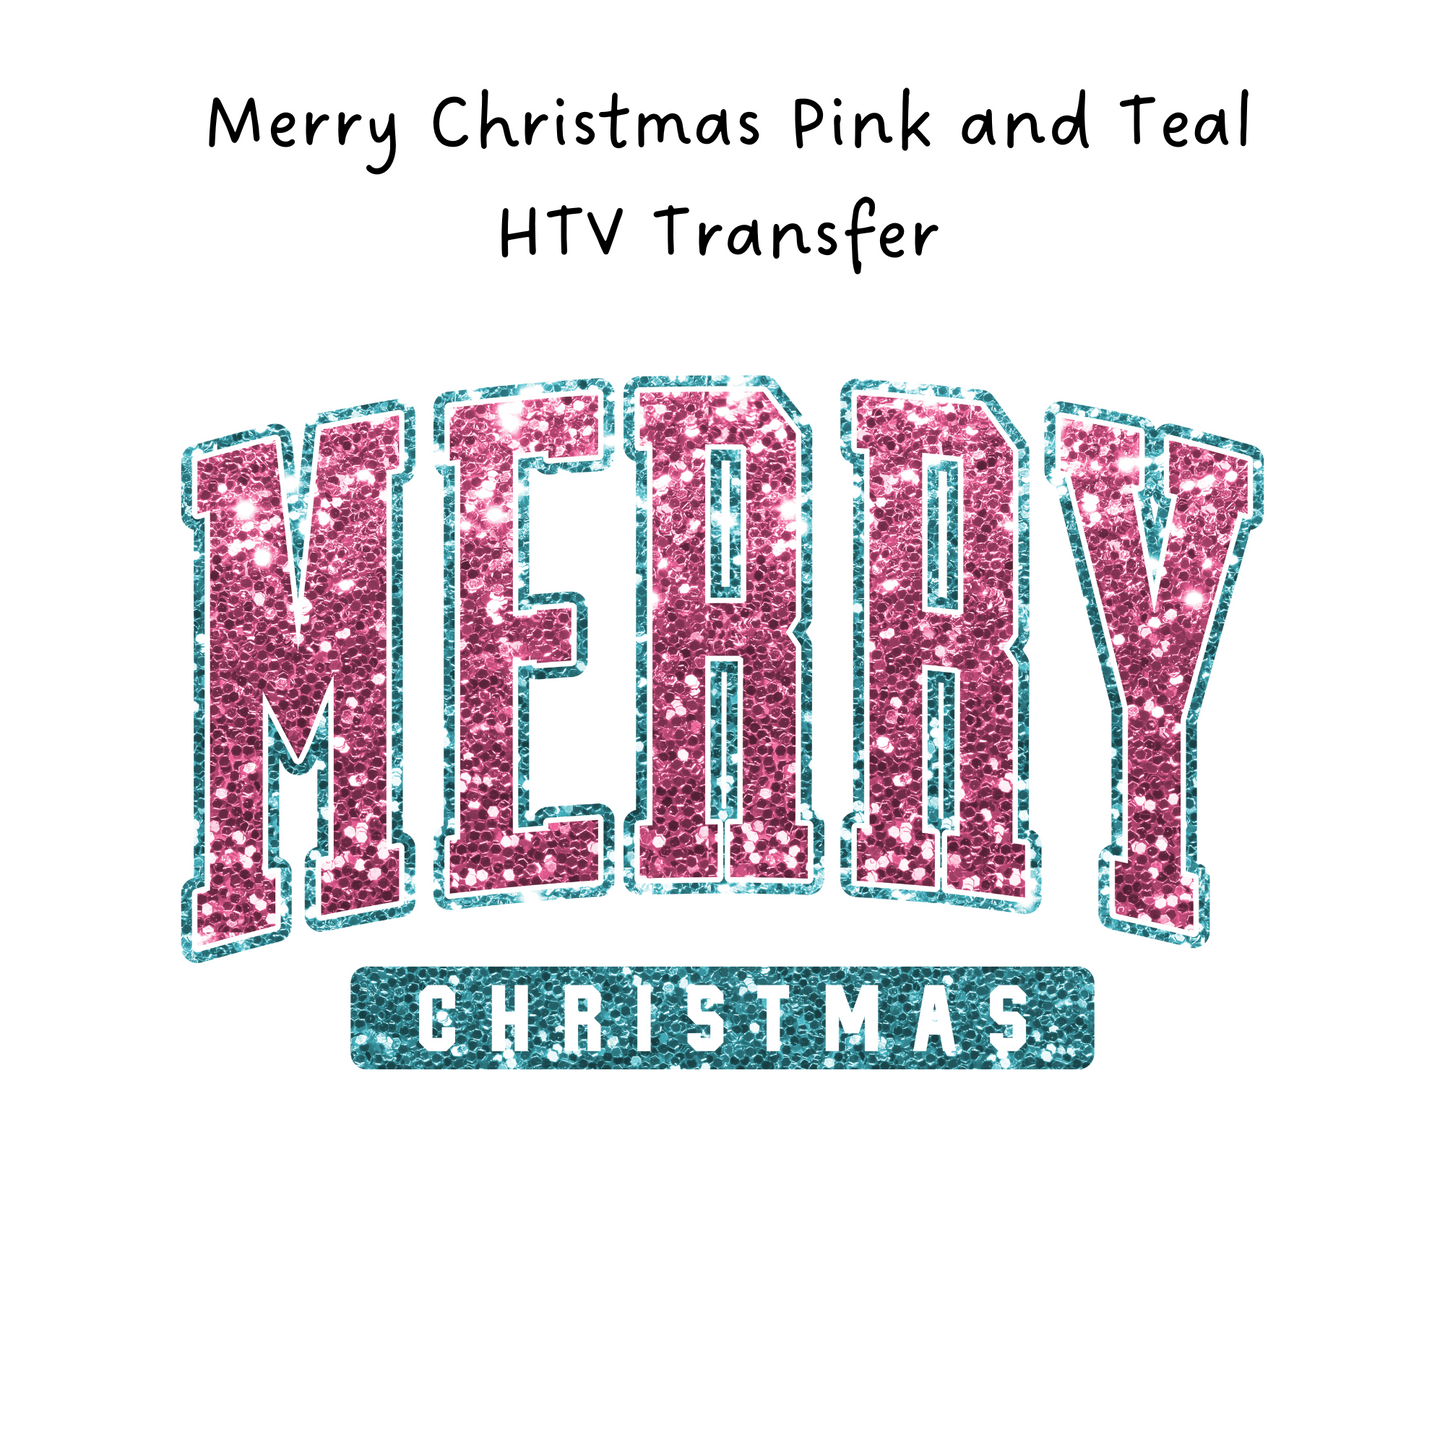 Merry Christmas Pink and Teal HTV Transfer